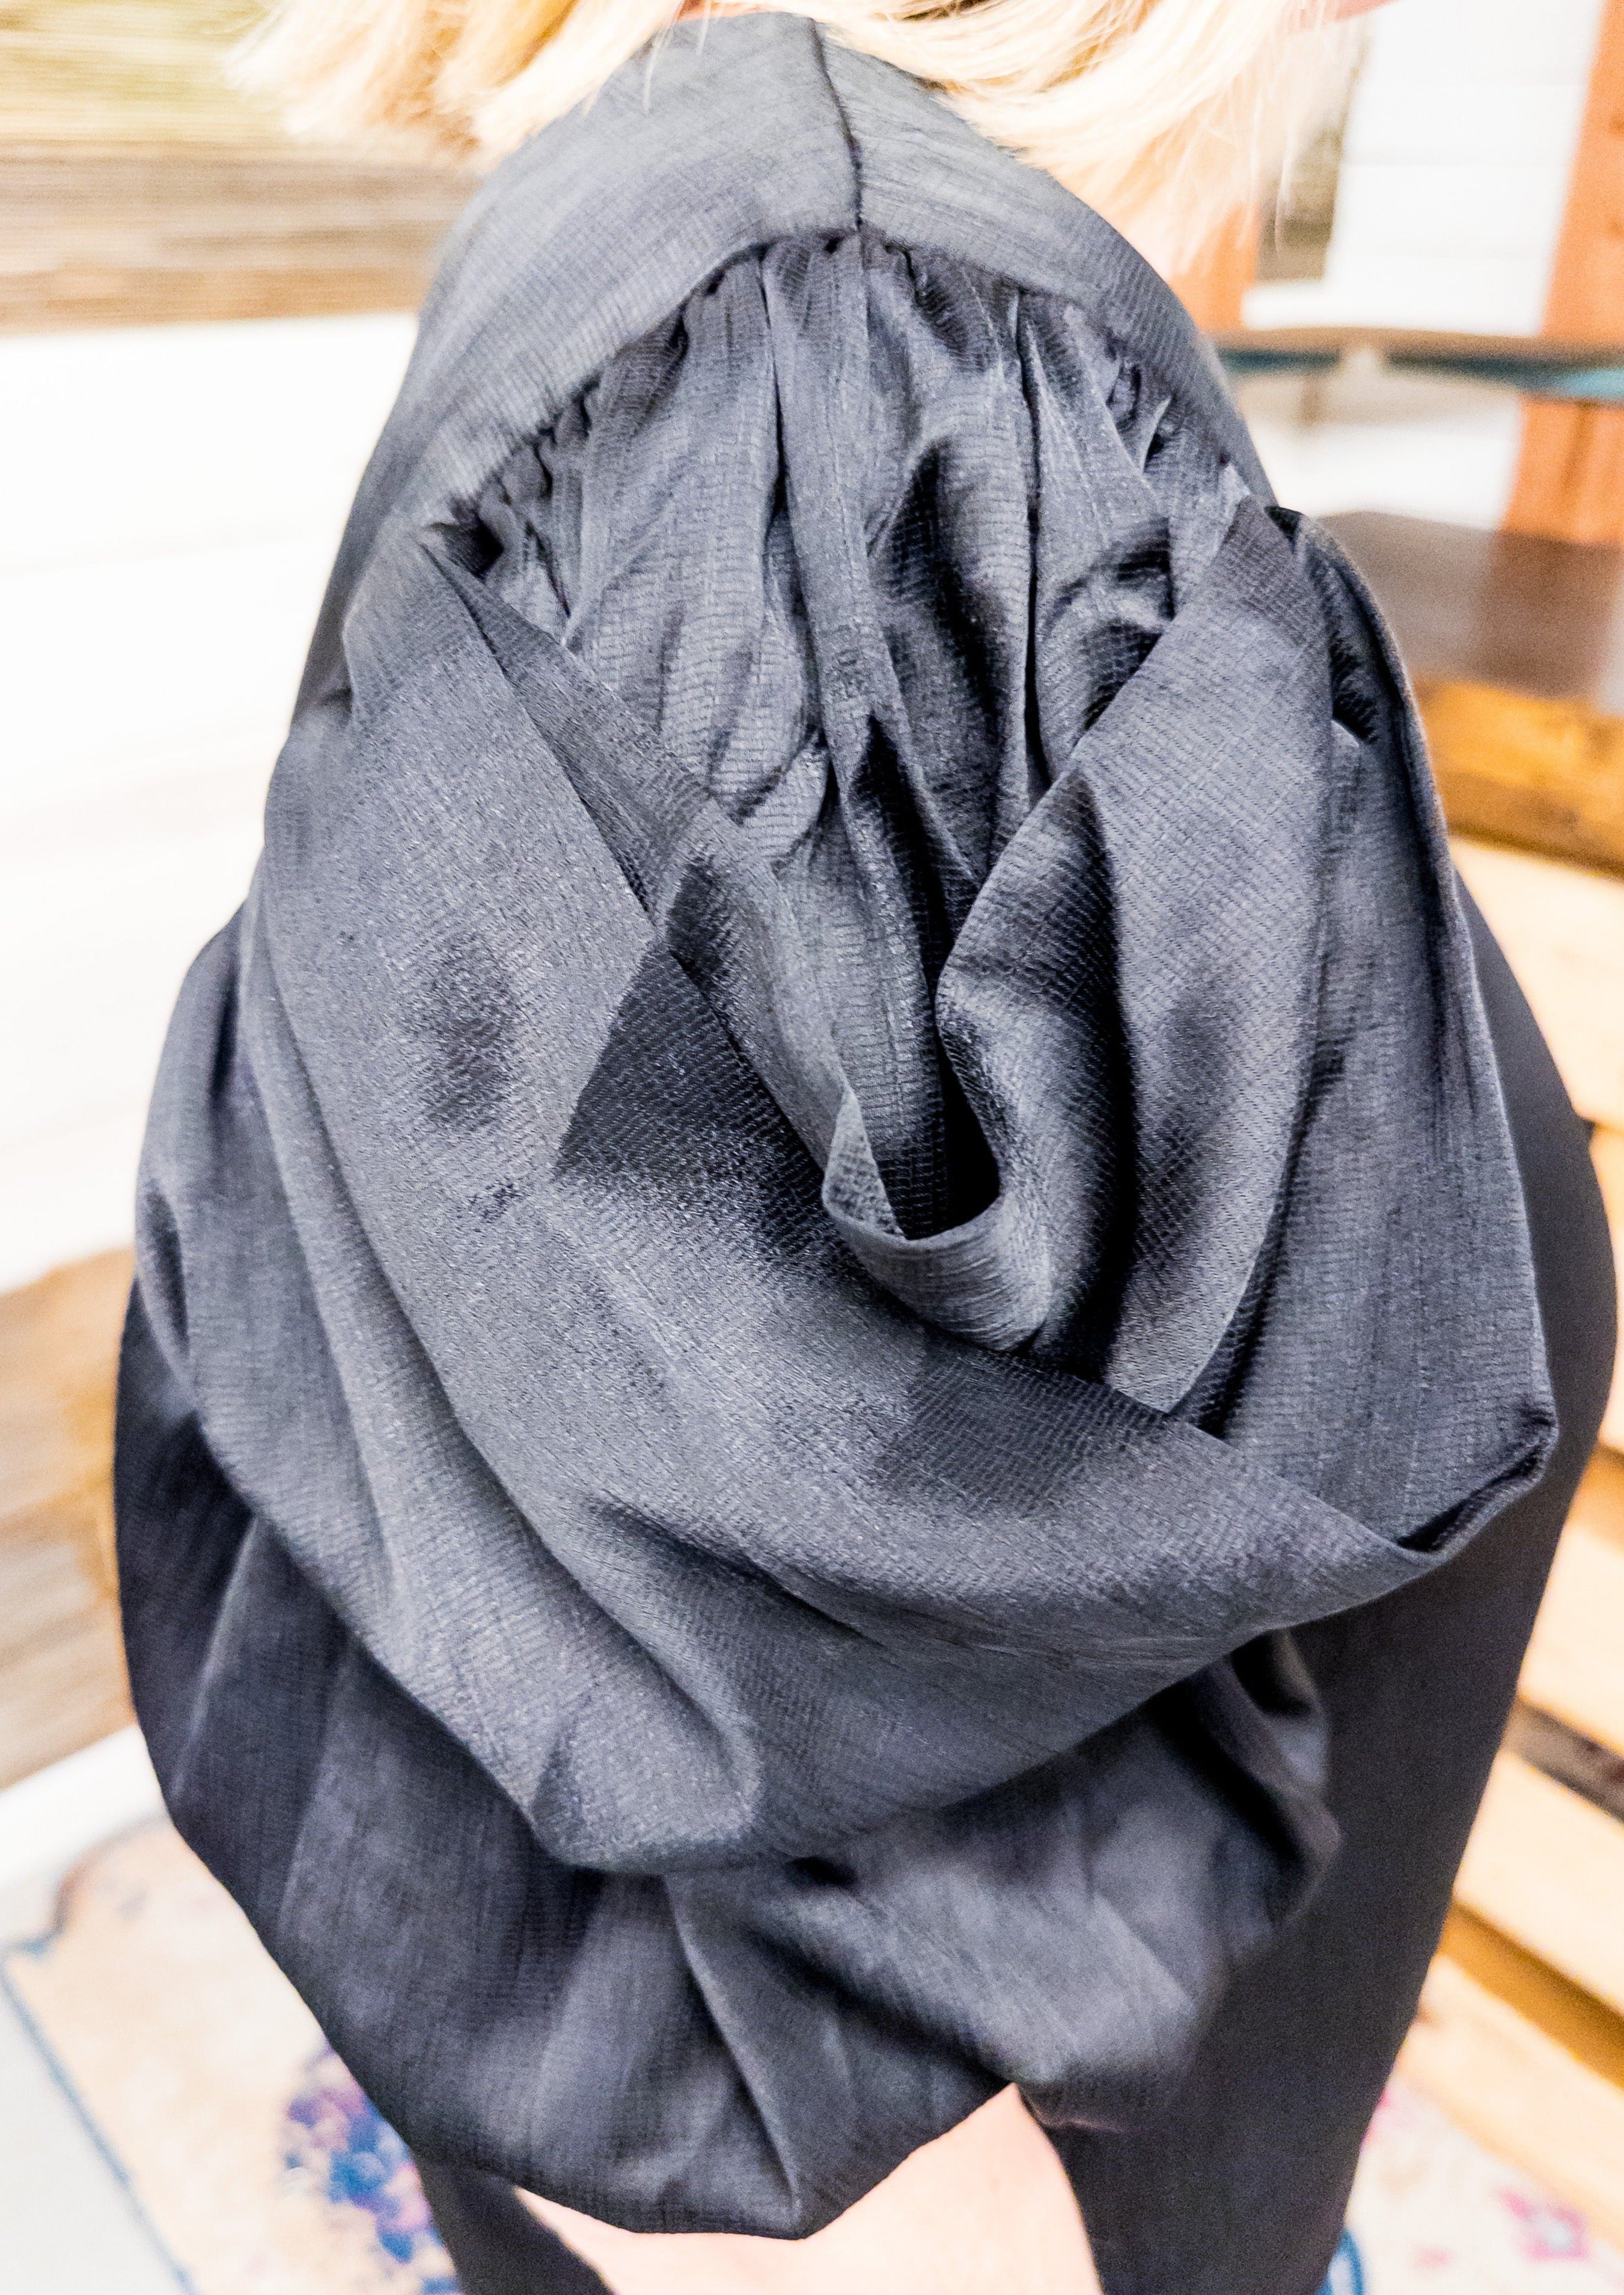 Close up of black draped sleeve showing the detail of the layered sleeve.